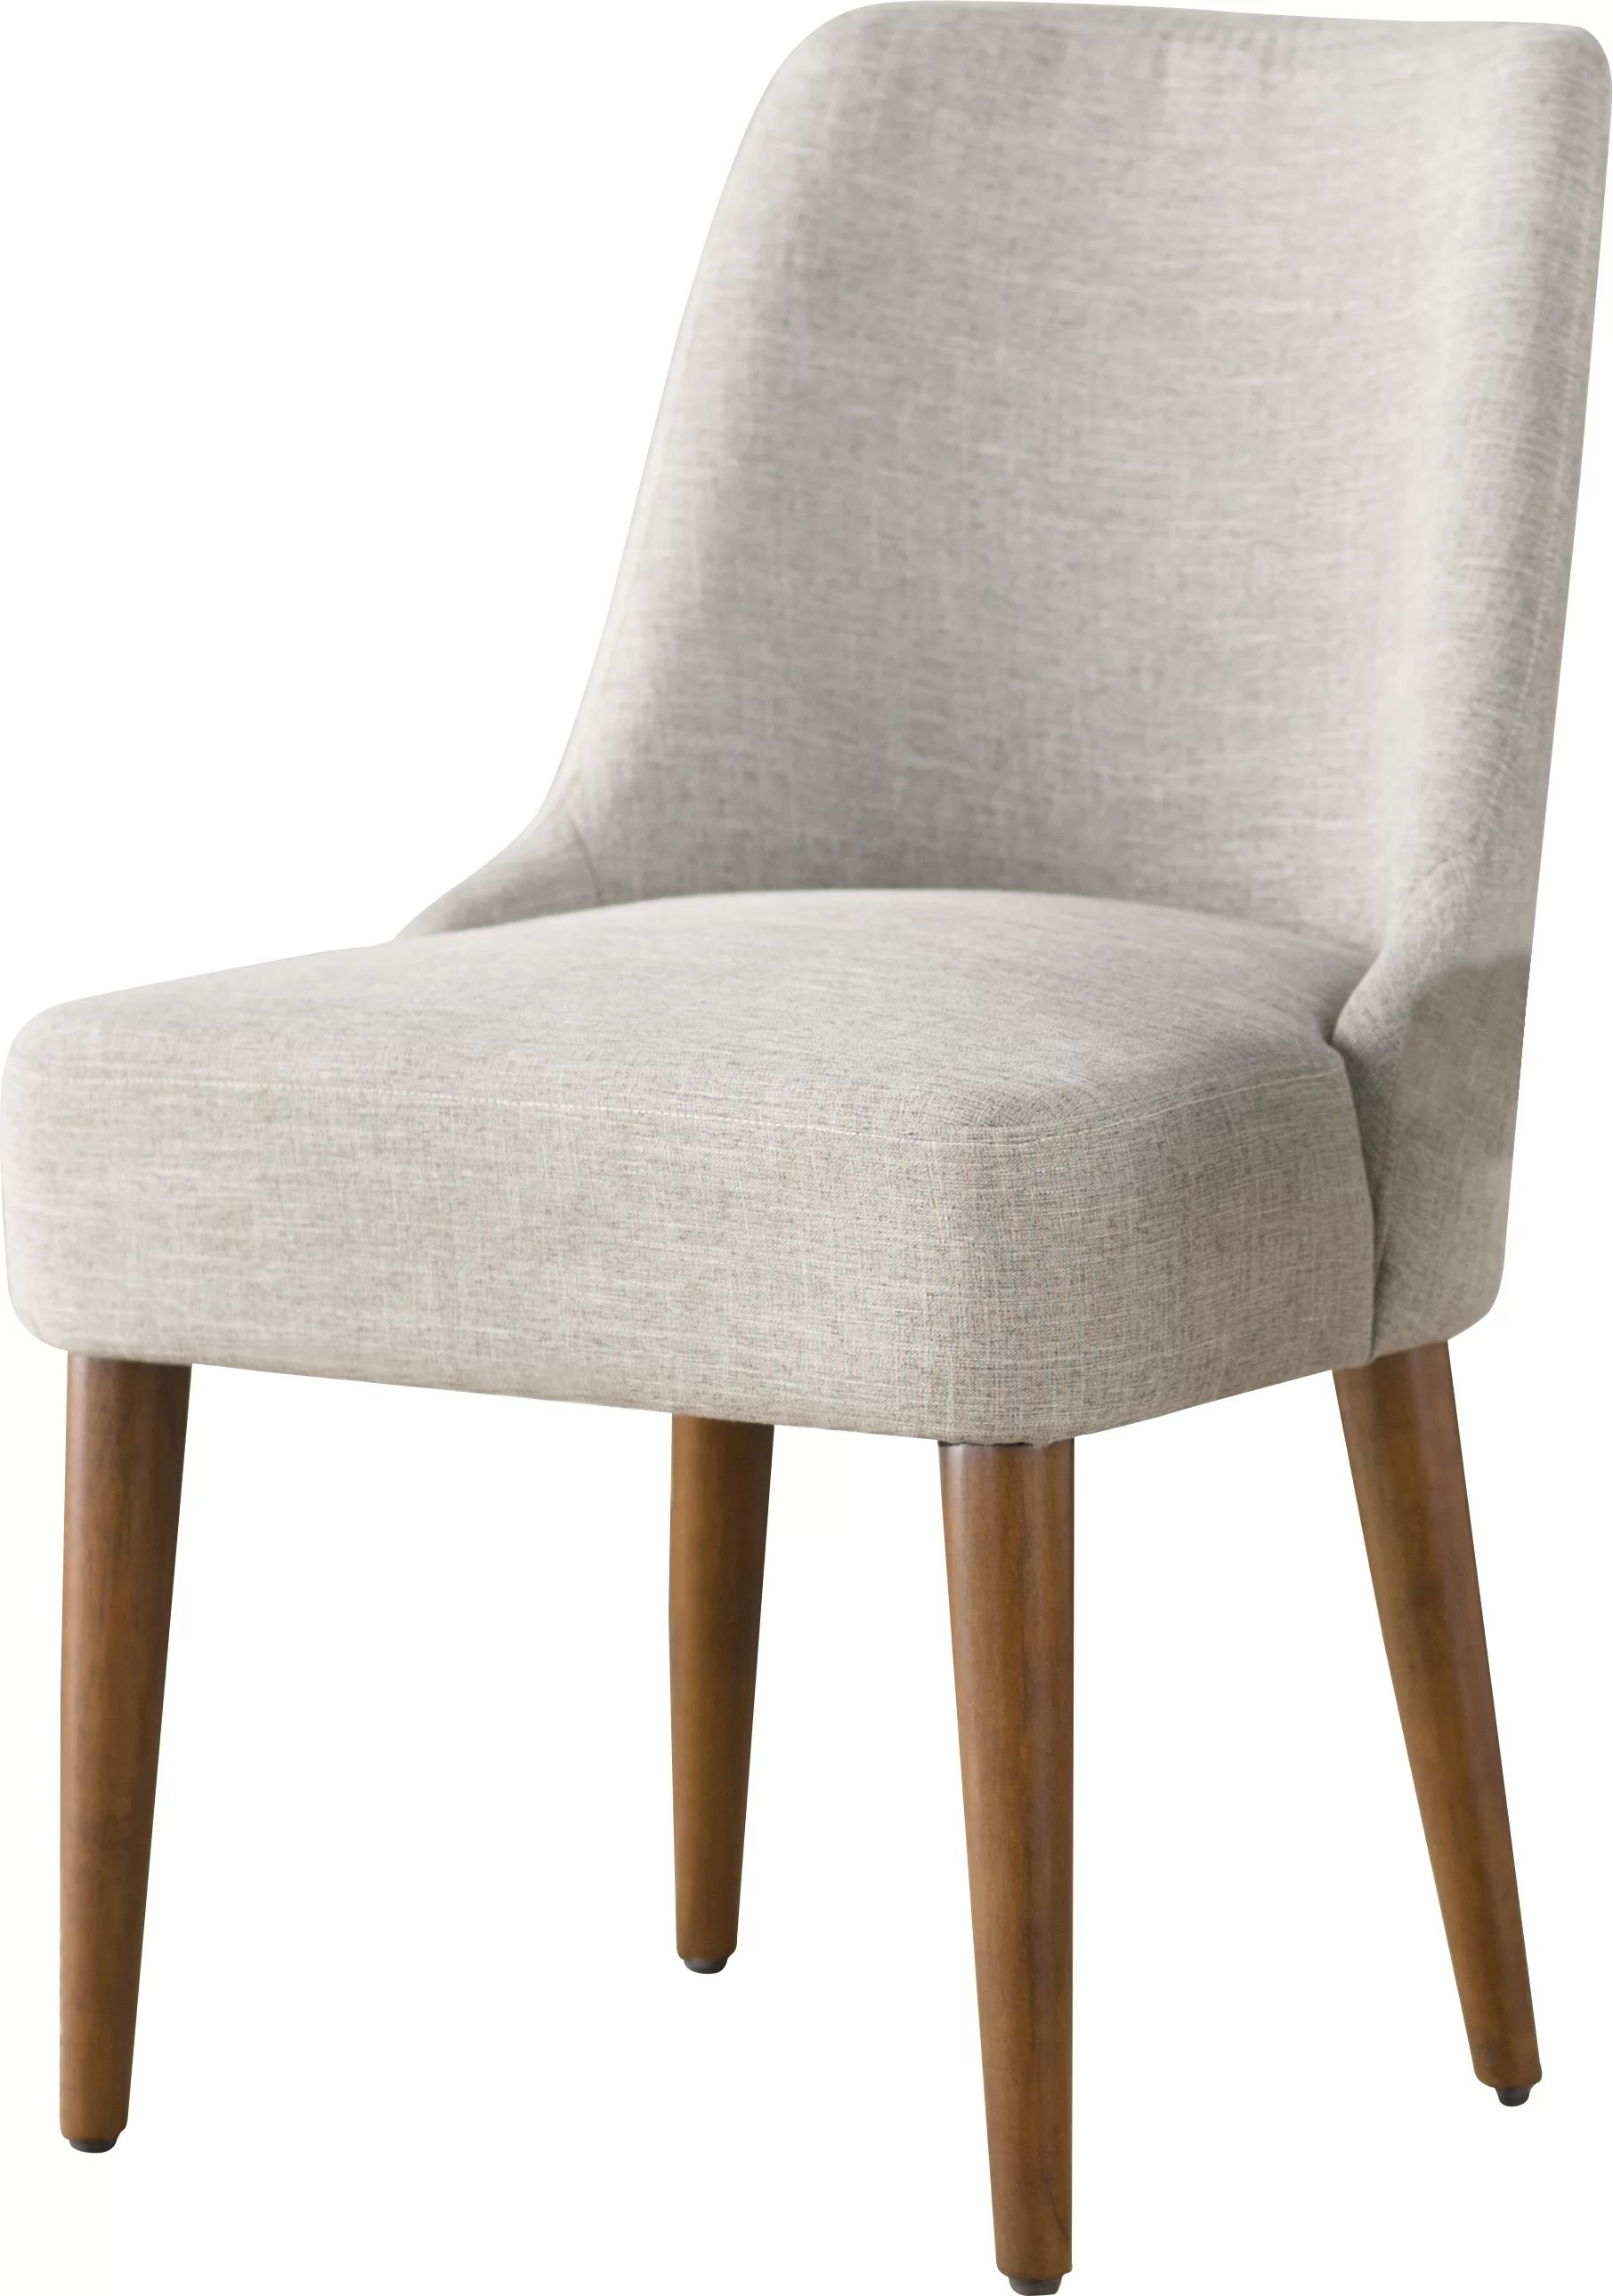 Demi-Leigh Upholstered Dining Chair | Wayfair North America